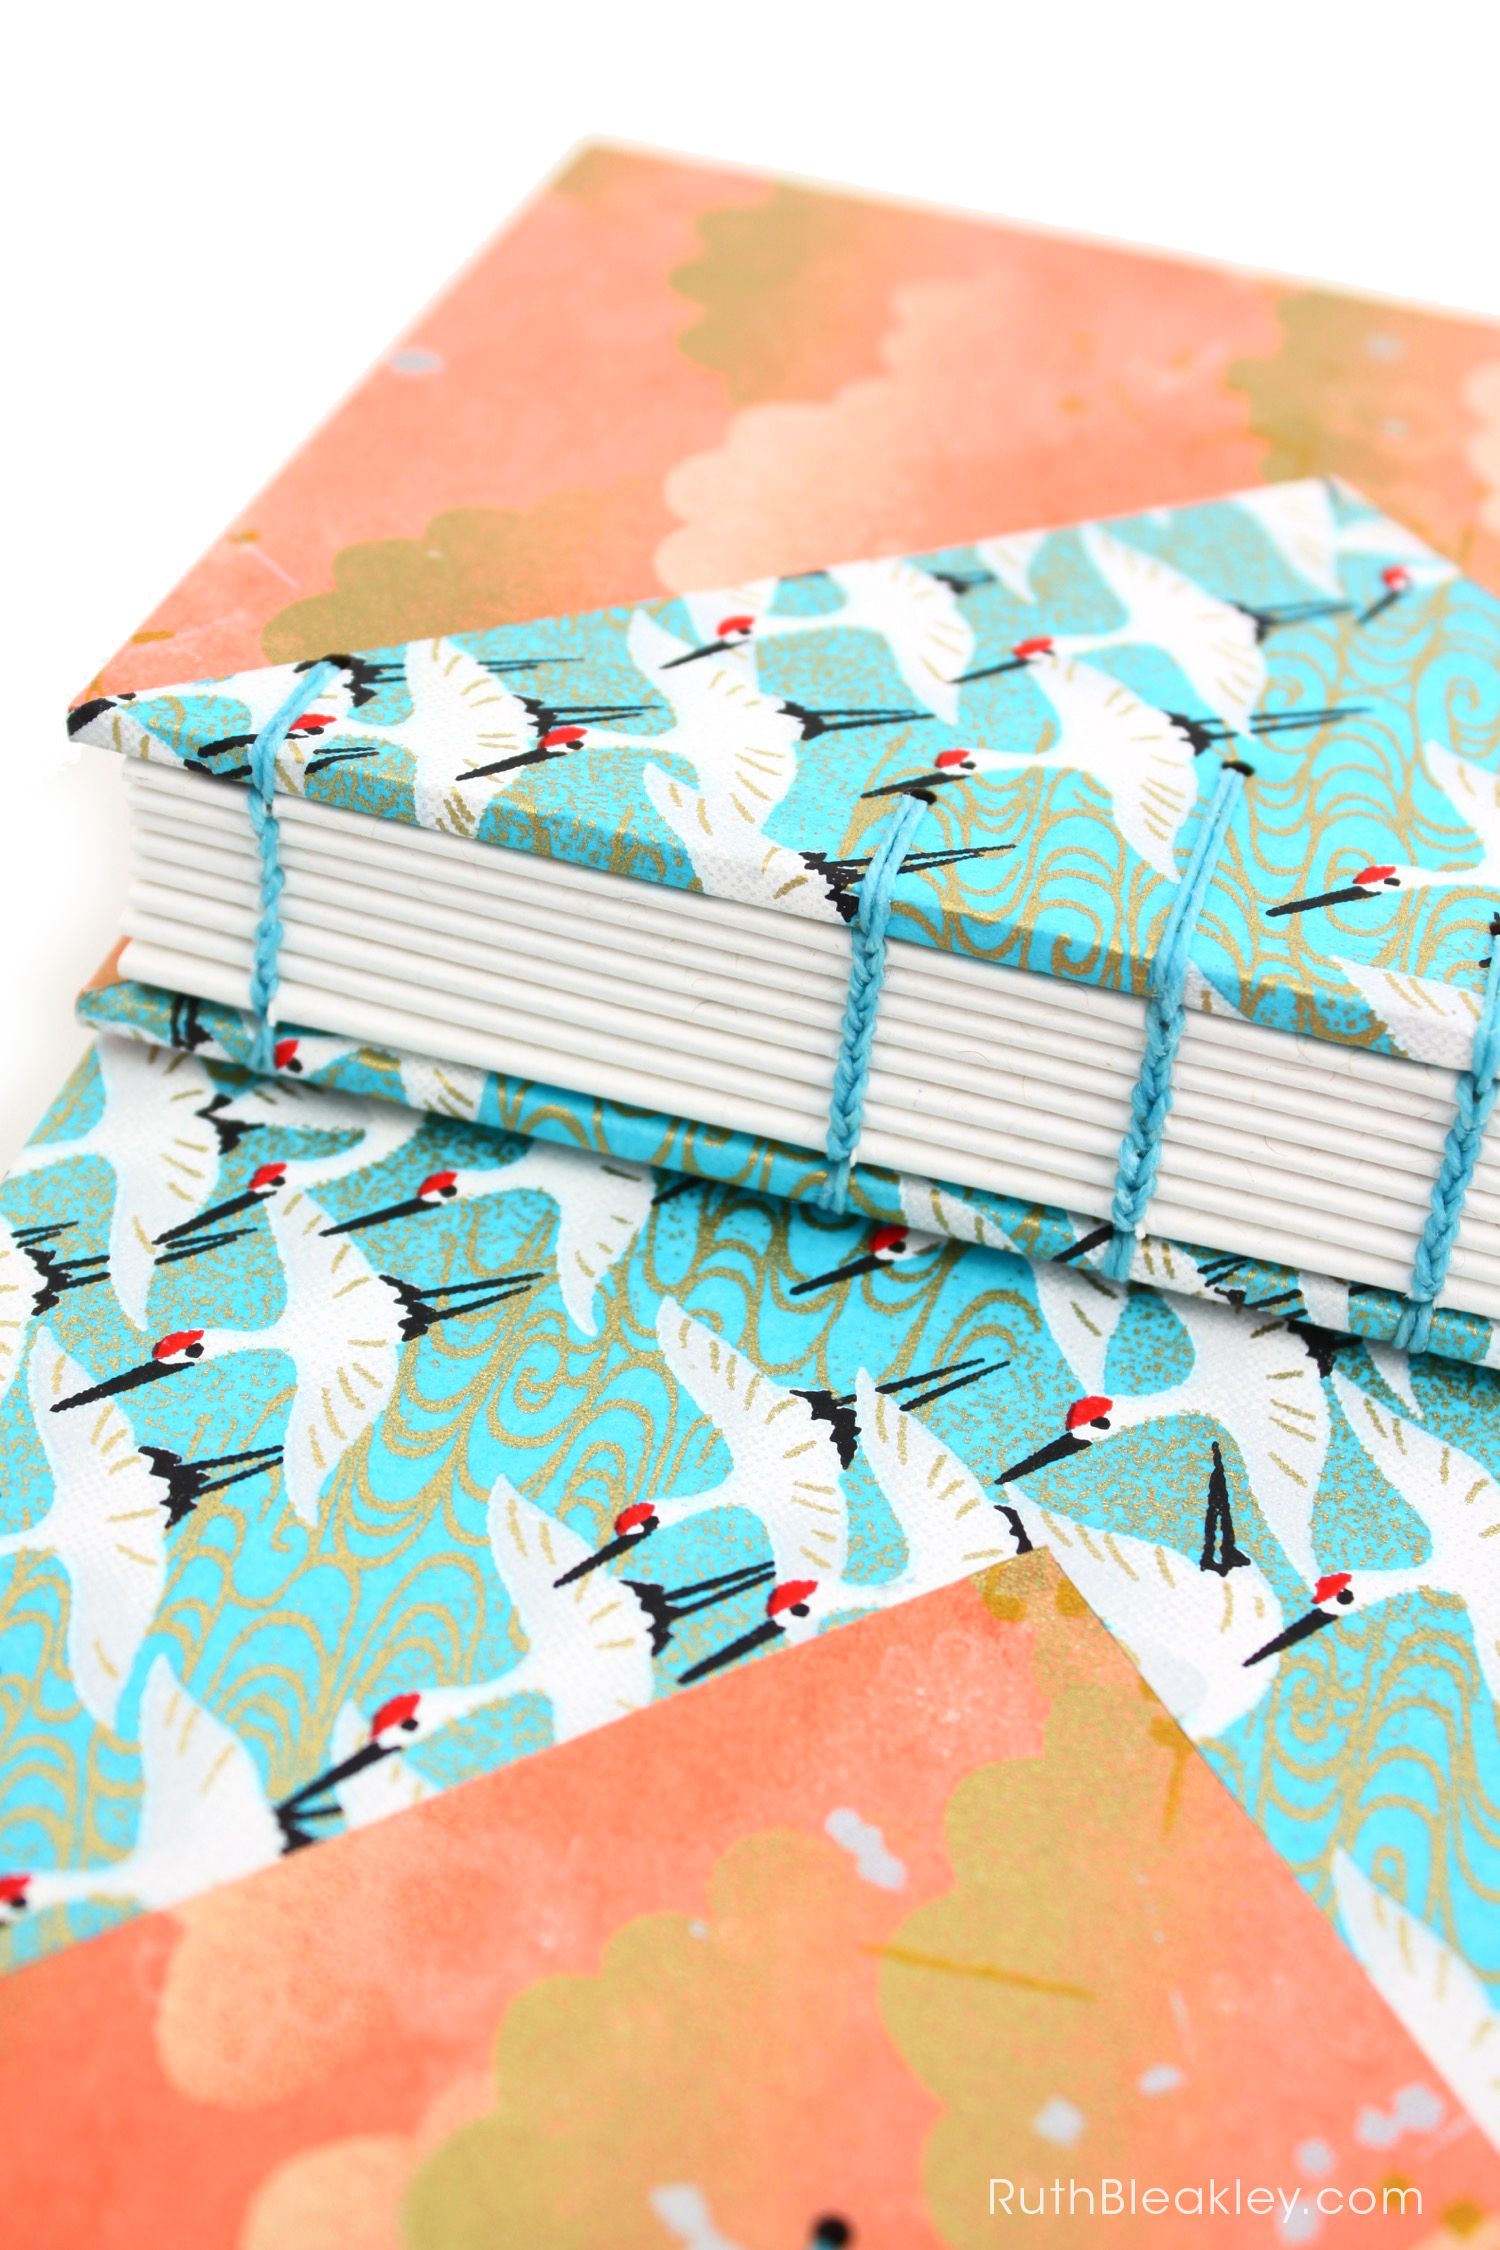 Blue Cranes and Peach Cloud Twin Journals by Ruth Bleakley that lay flat when open - 8